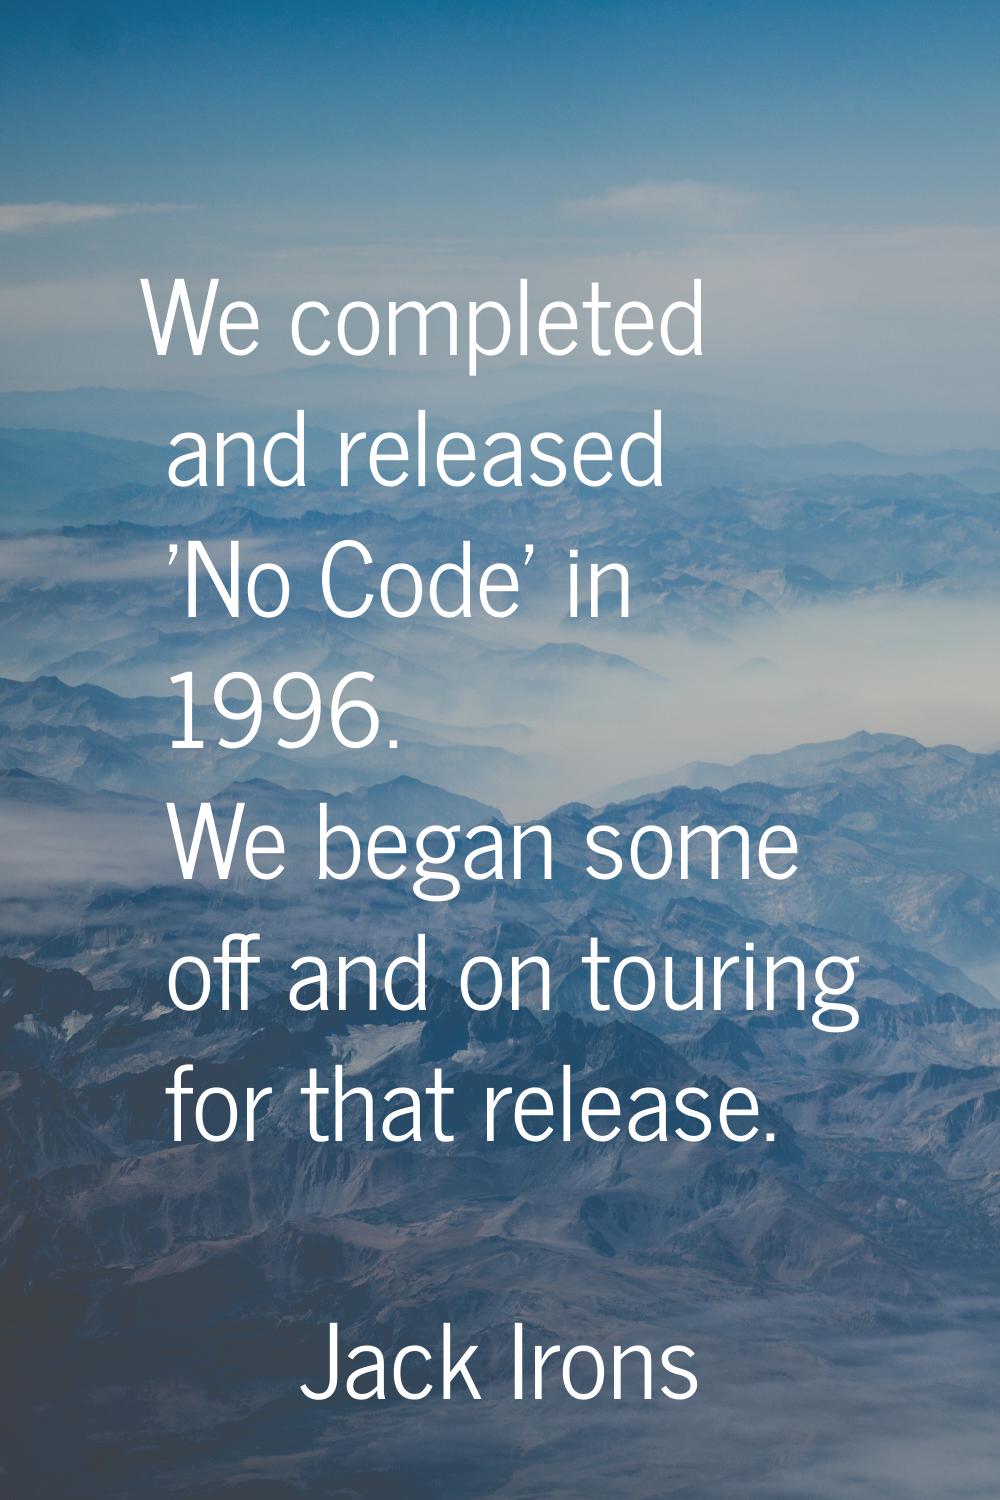 We completed and released 'No Code' in 1996. We began some off and on touring for that release.